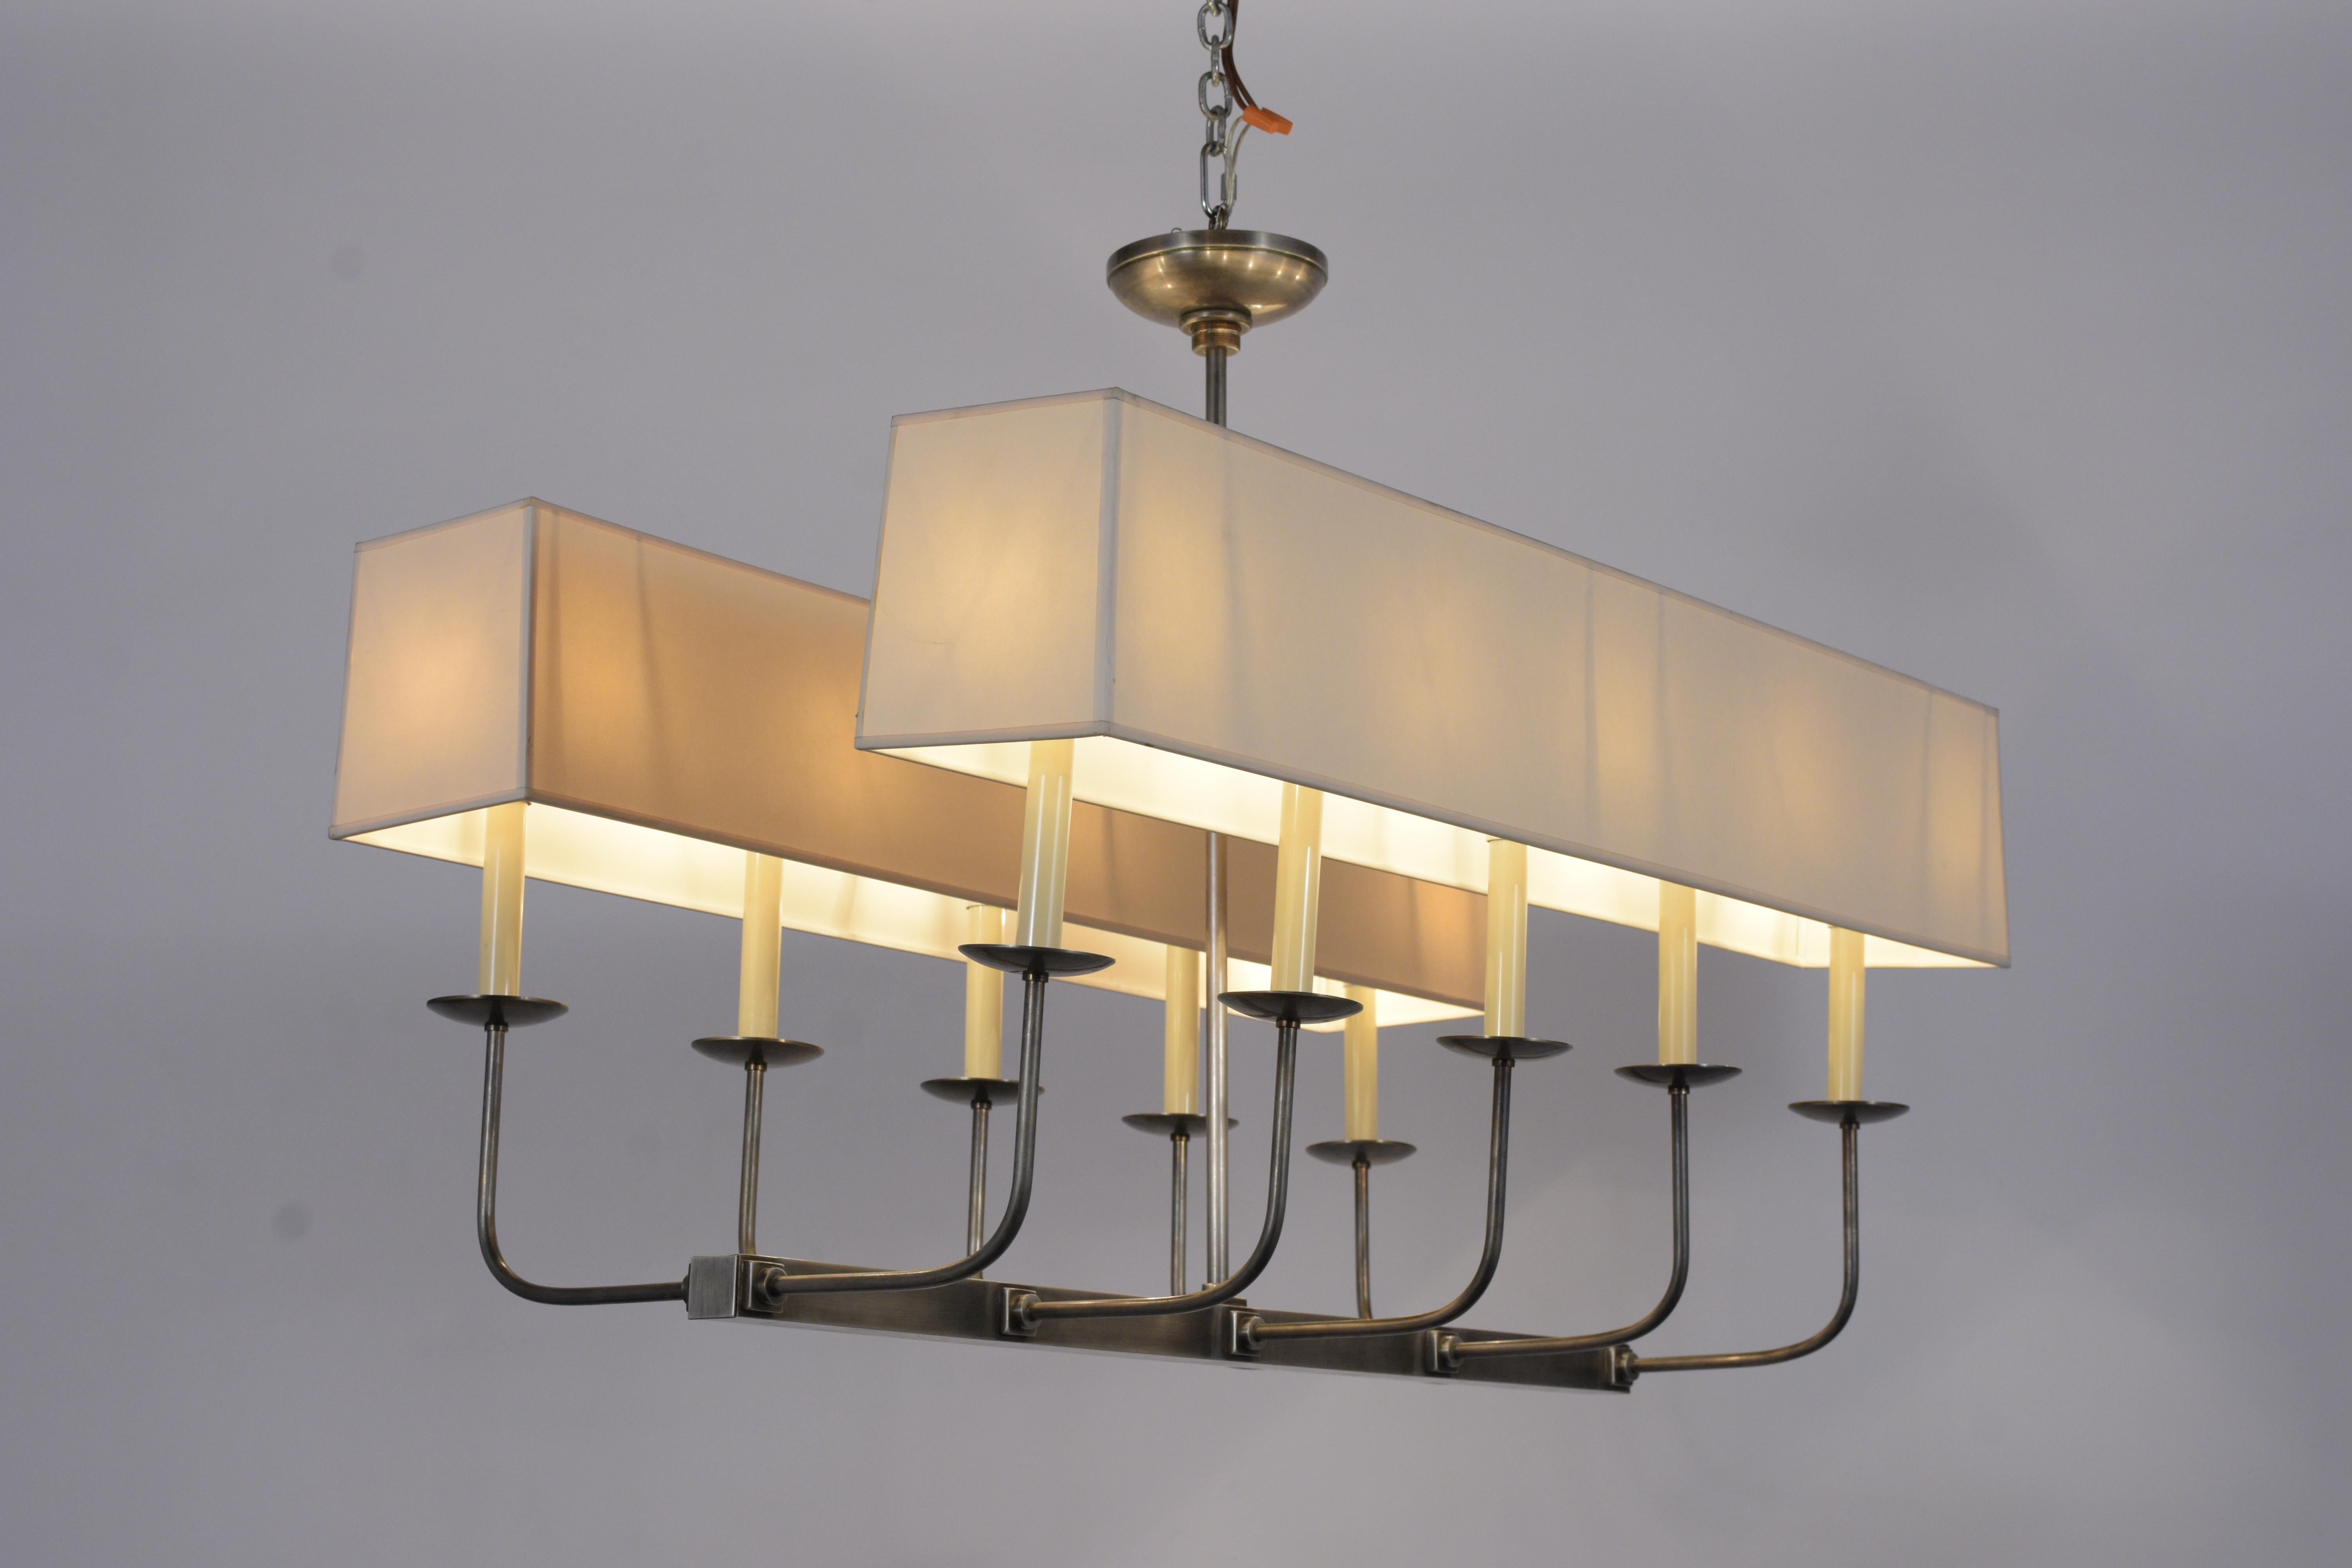 This 1950's Tommi Parzinger 10-arm chandelier is in great condition is made from nickel-plated metal and comes with its original paper light shades in good condition. The Mid-Century Modern Parzinger chandelier is wired to US standards is in working